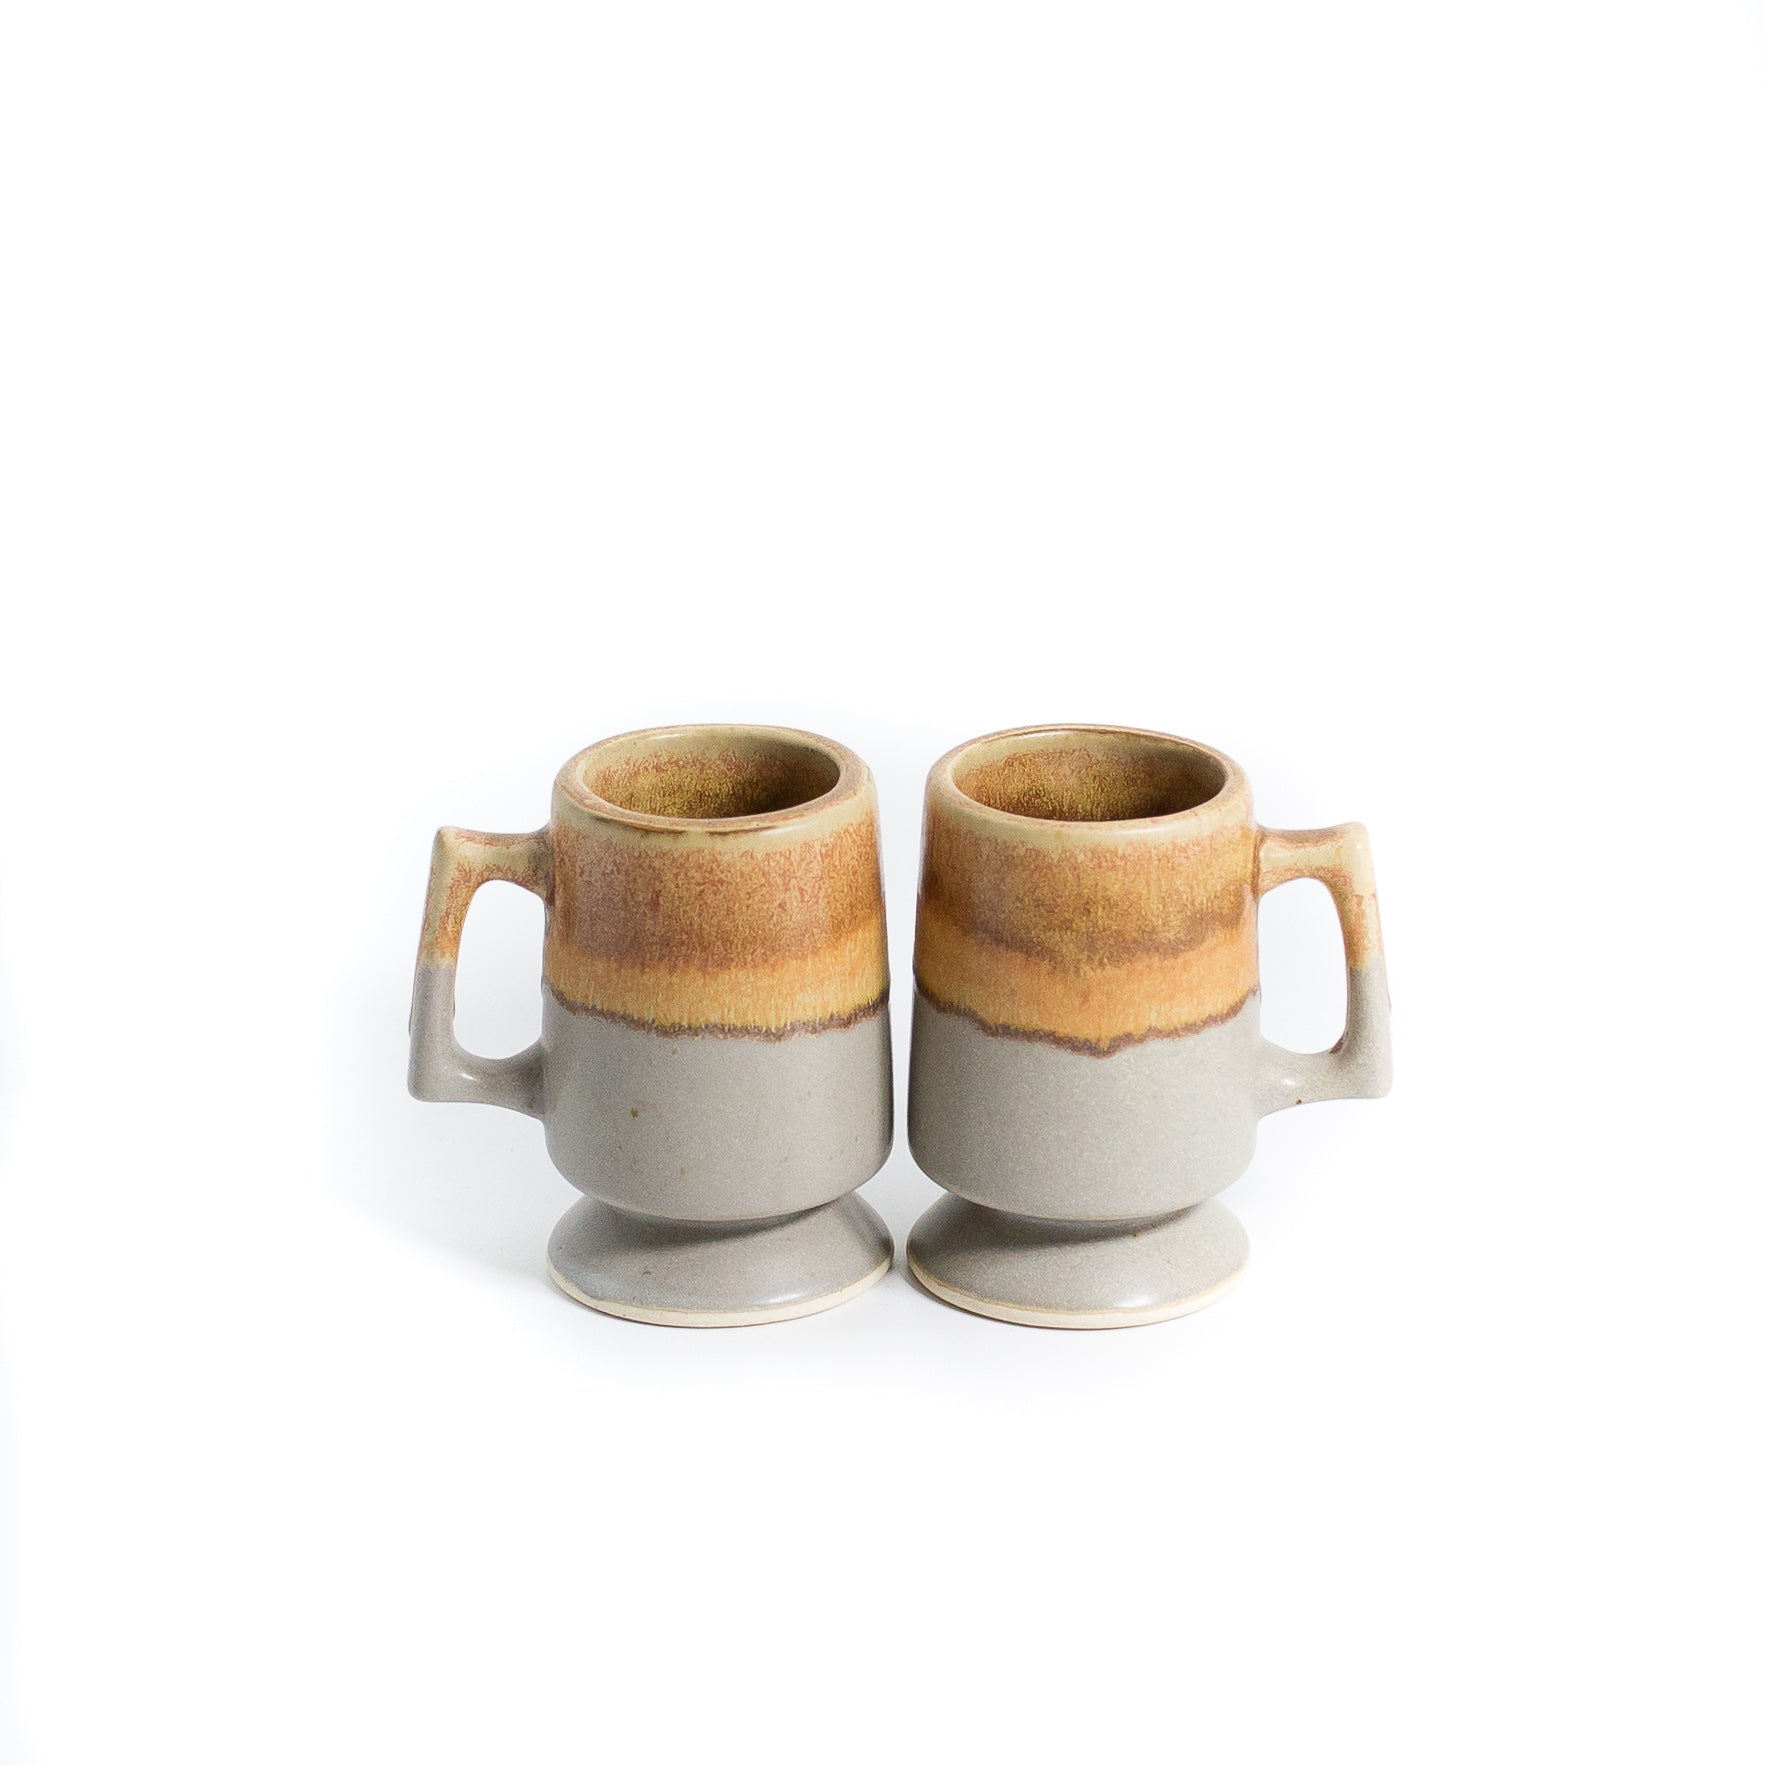 Beige and gray coffee mugs stacked on white background